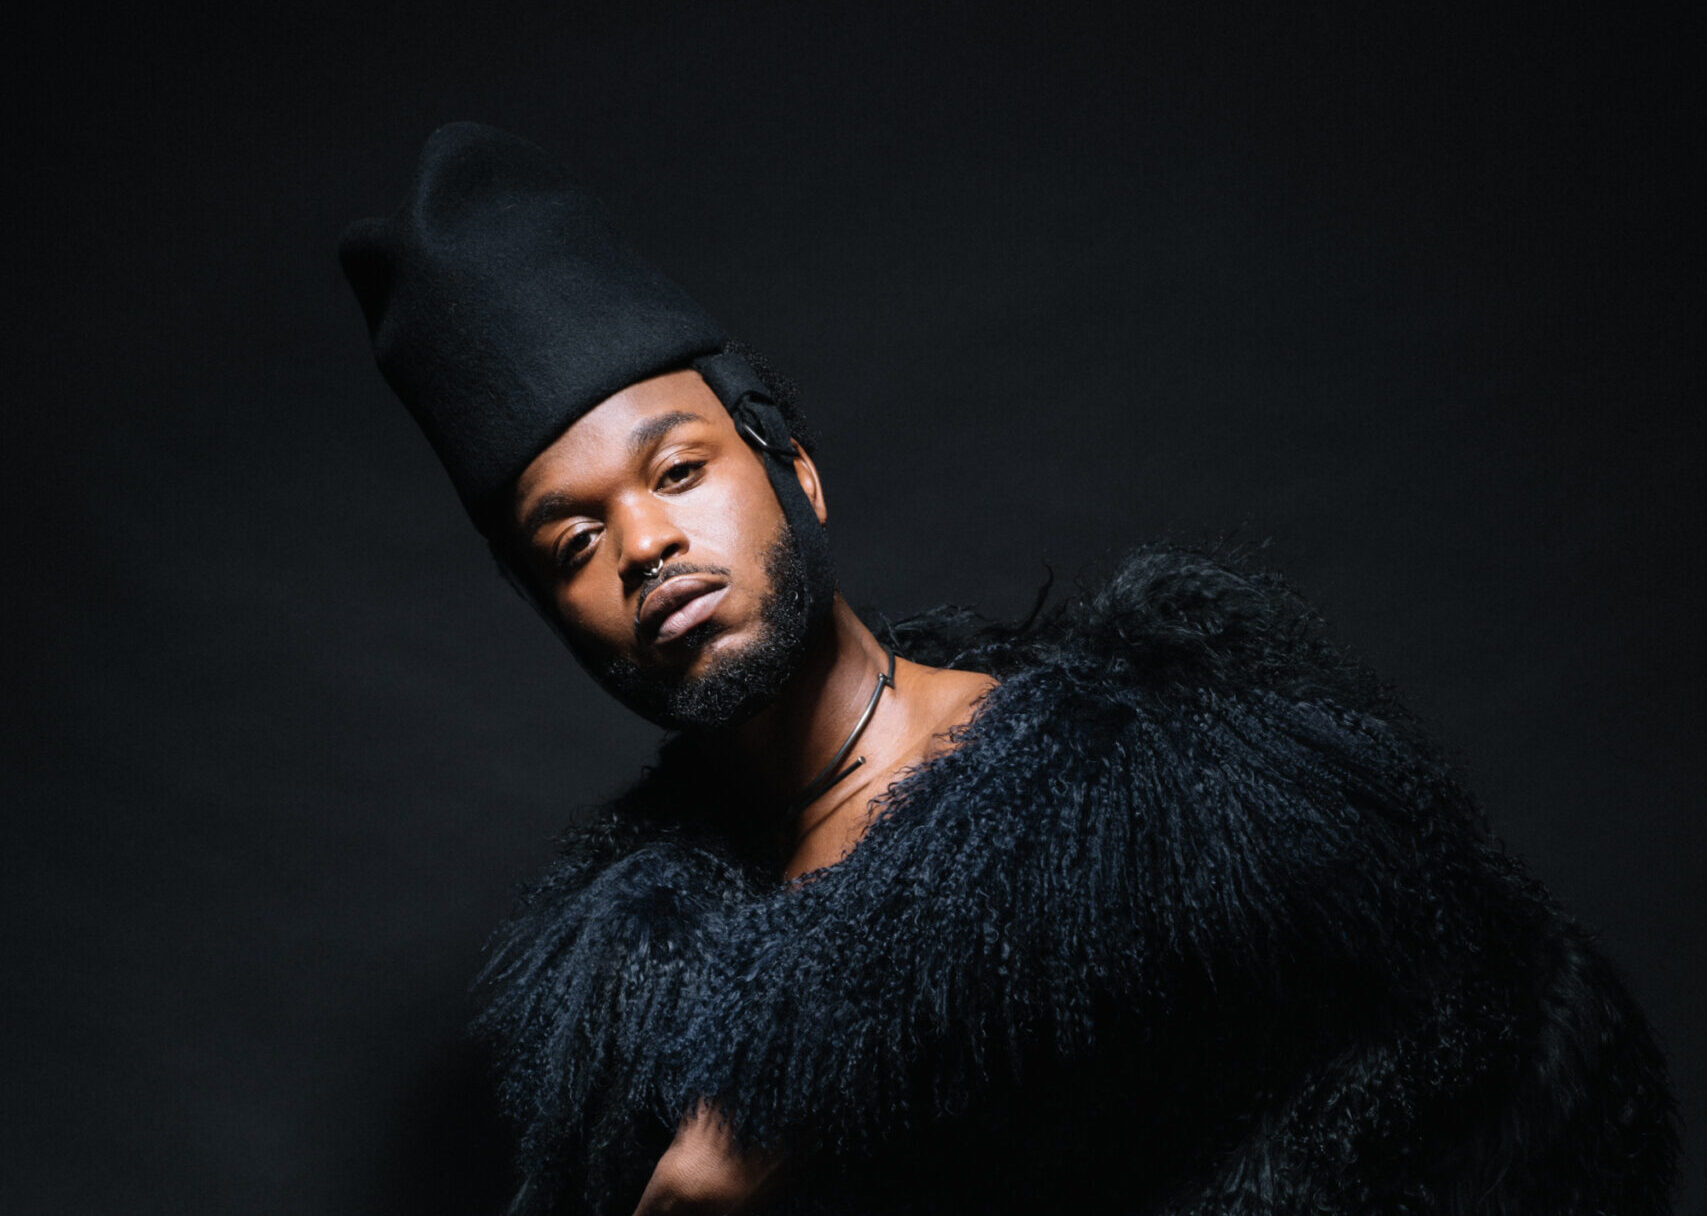 Young black artist Cakes Da Killa wears a gorgeous black fur and fringe outfit and hat. He looks directly at the camera, posing on a black background. 